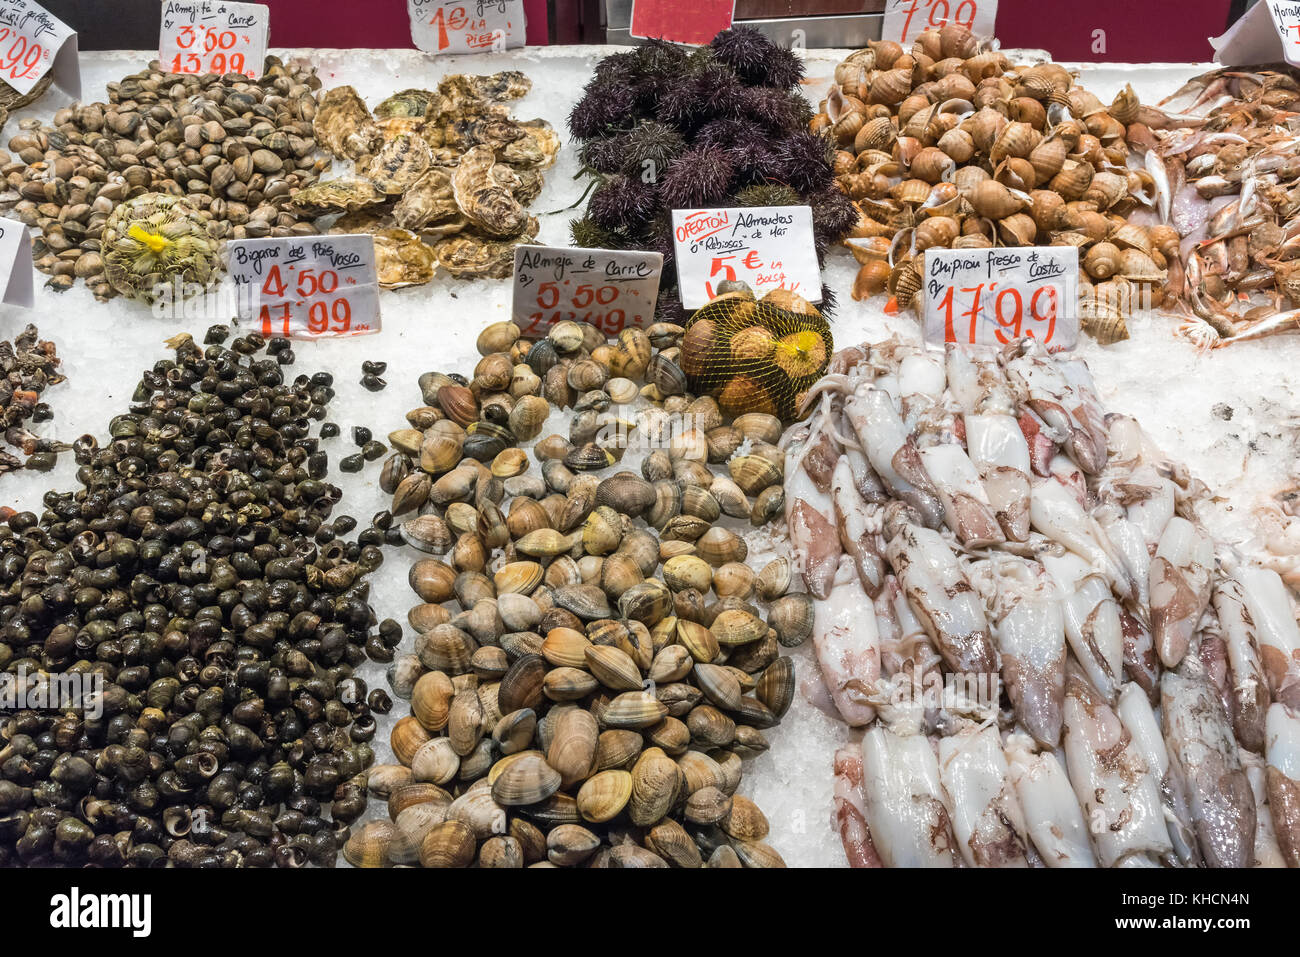 Fresh seafood for sale at a market in Madrid, Spain Stock Photo